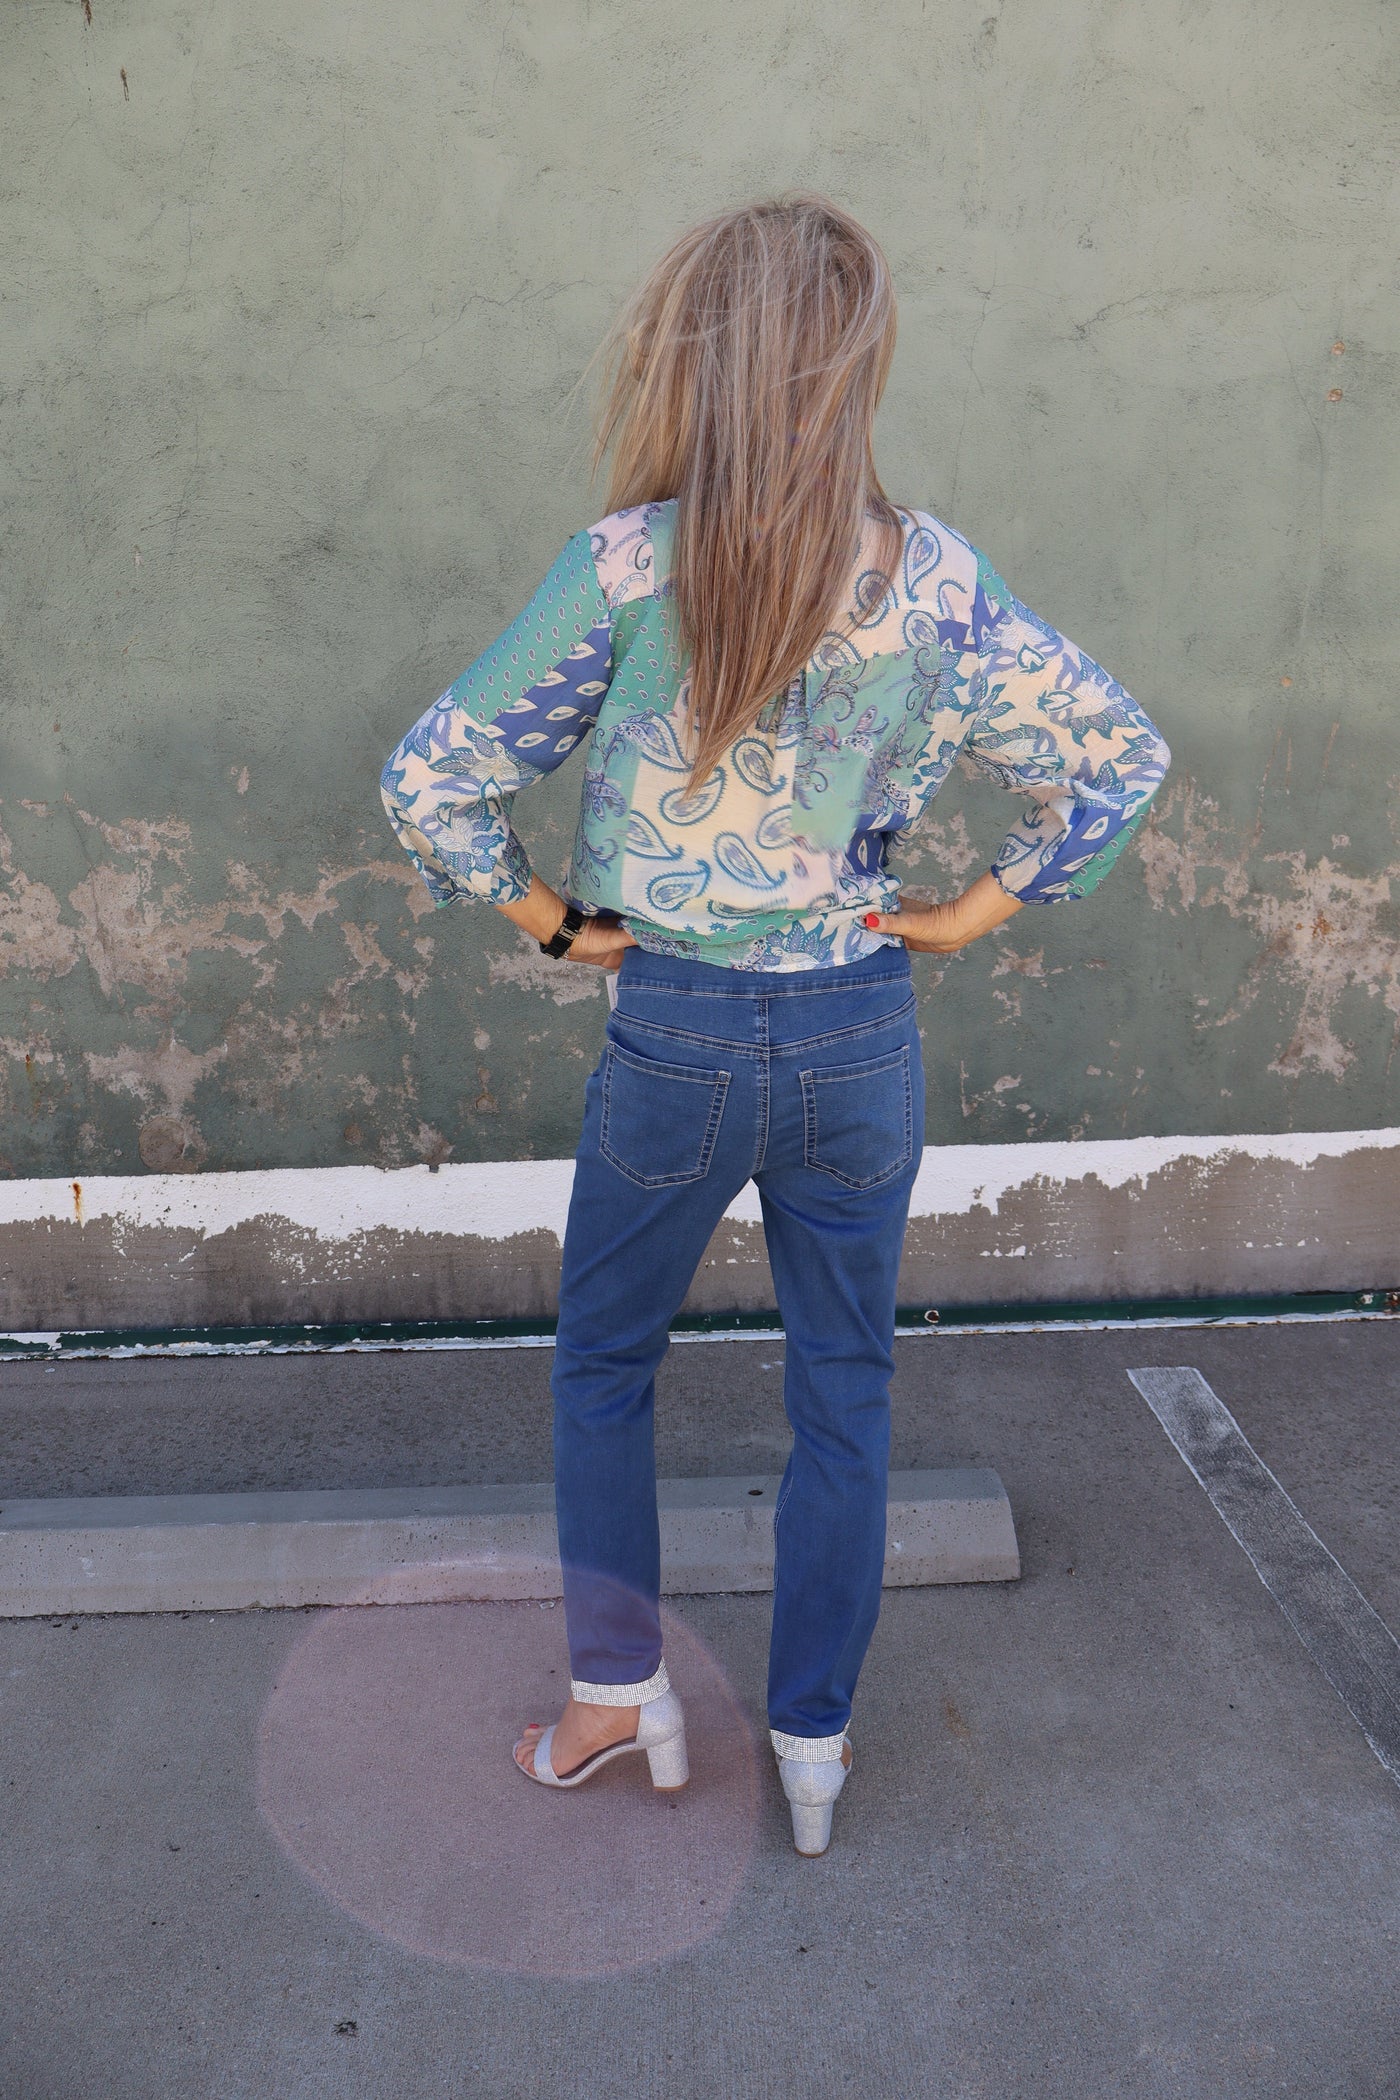 Model is wearing a dark wash blue jean with sparkle details ont the pockets and hemming of ankle. Jeans are straight leg and worn with a paisley blouse and high heels.